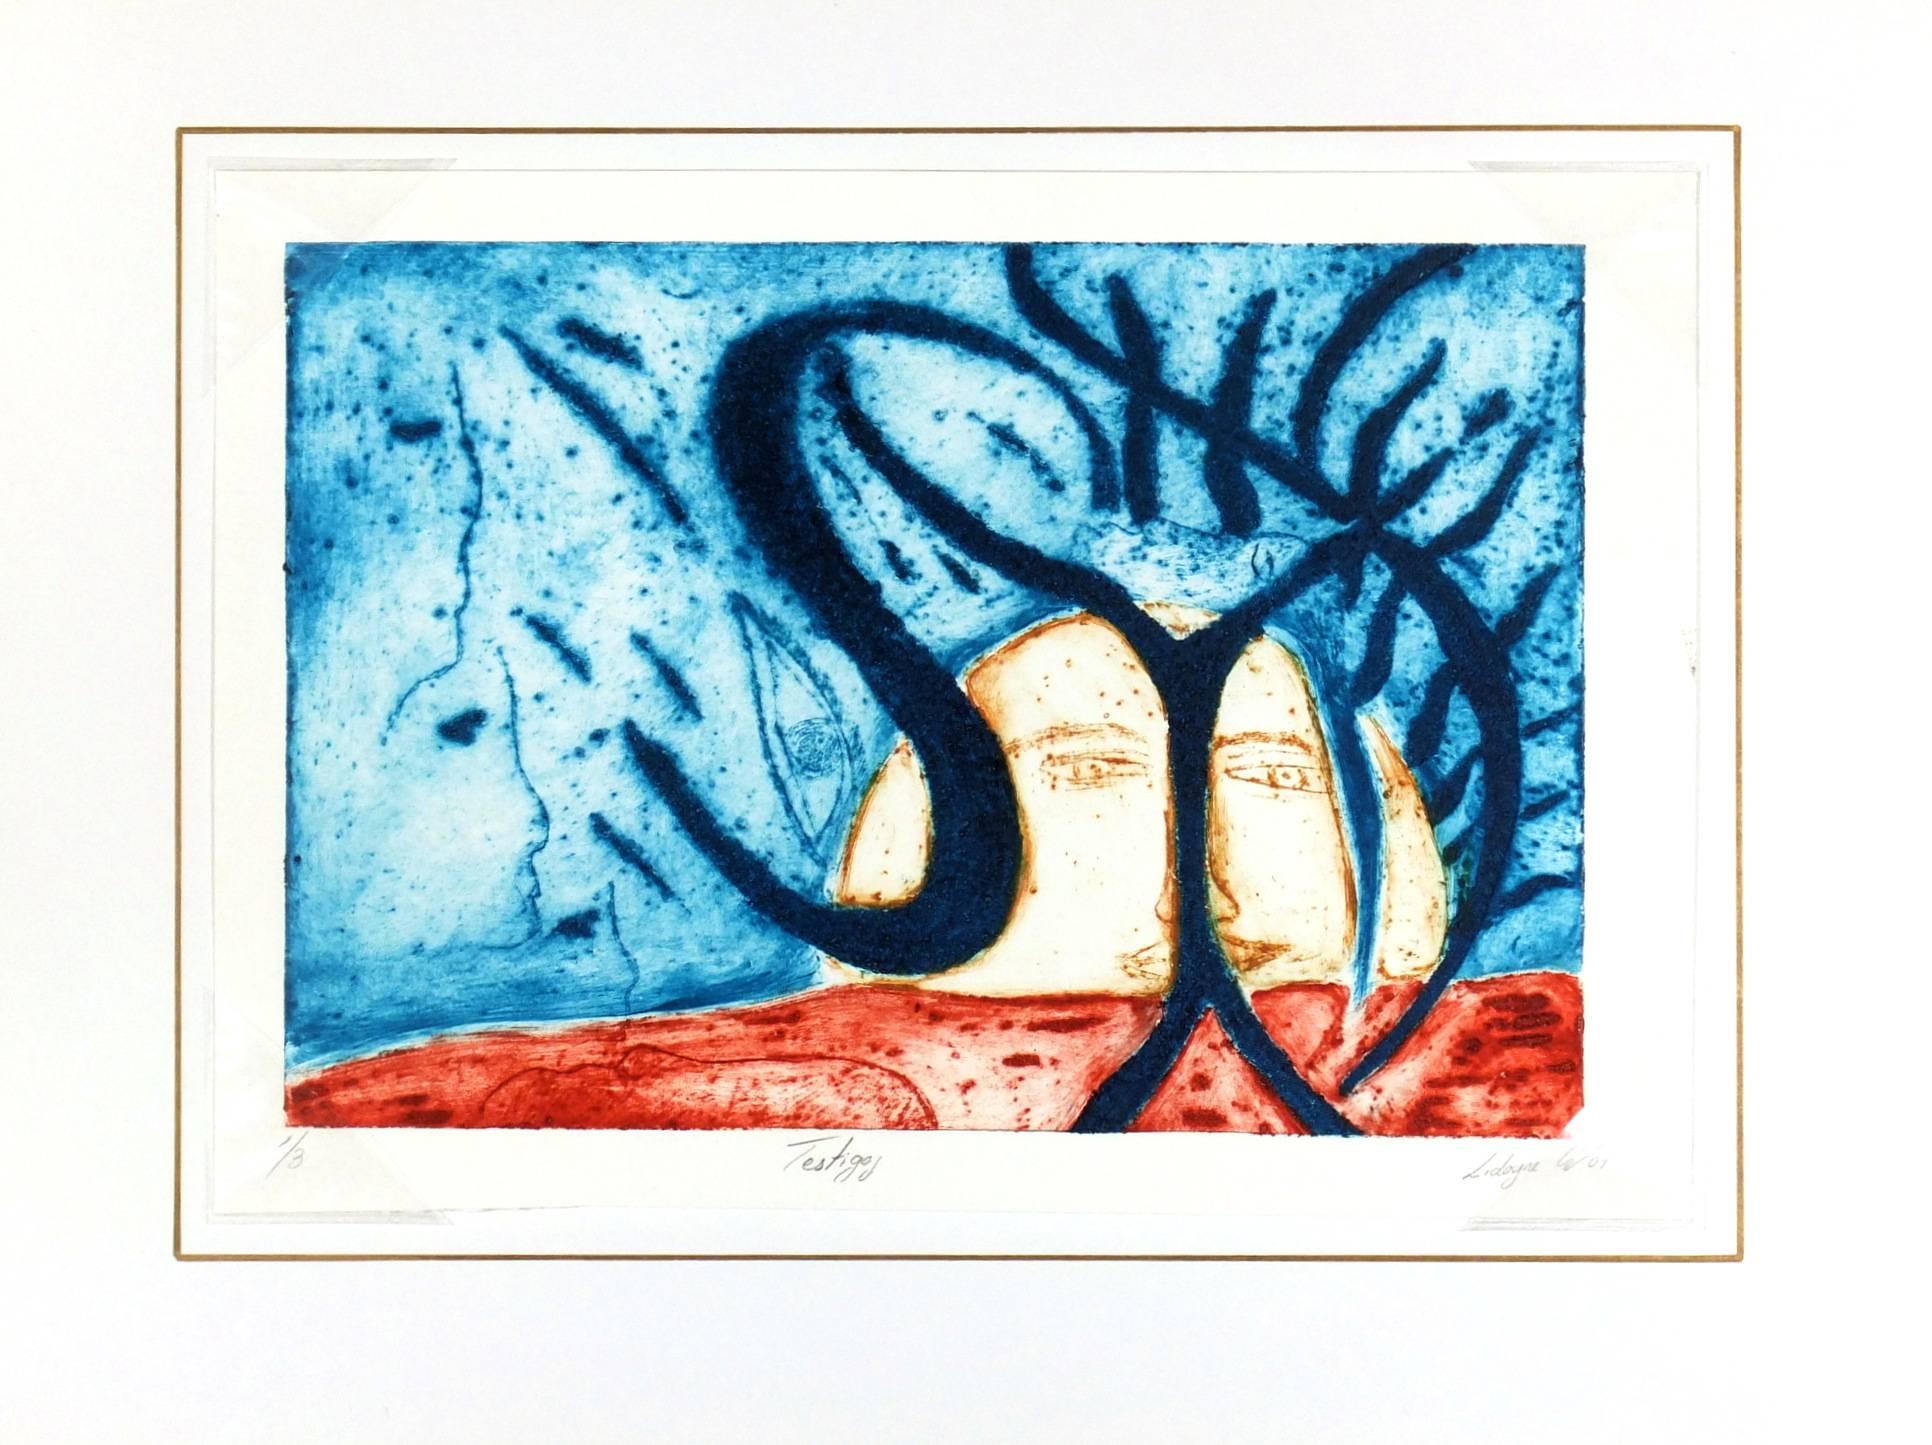 Delightful and bright aquatint etching of a sweet faced sun rising over a red terrain by Mexican artist Lidoyne, 2009. Signed and dated lower right, titled lower center, numbered 1 of 3 lower left. 

Original artwork on paper displayed on a white